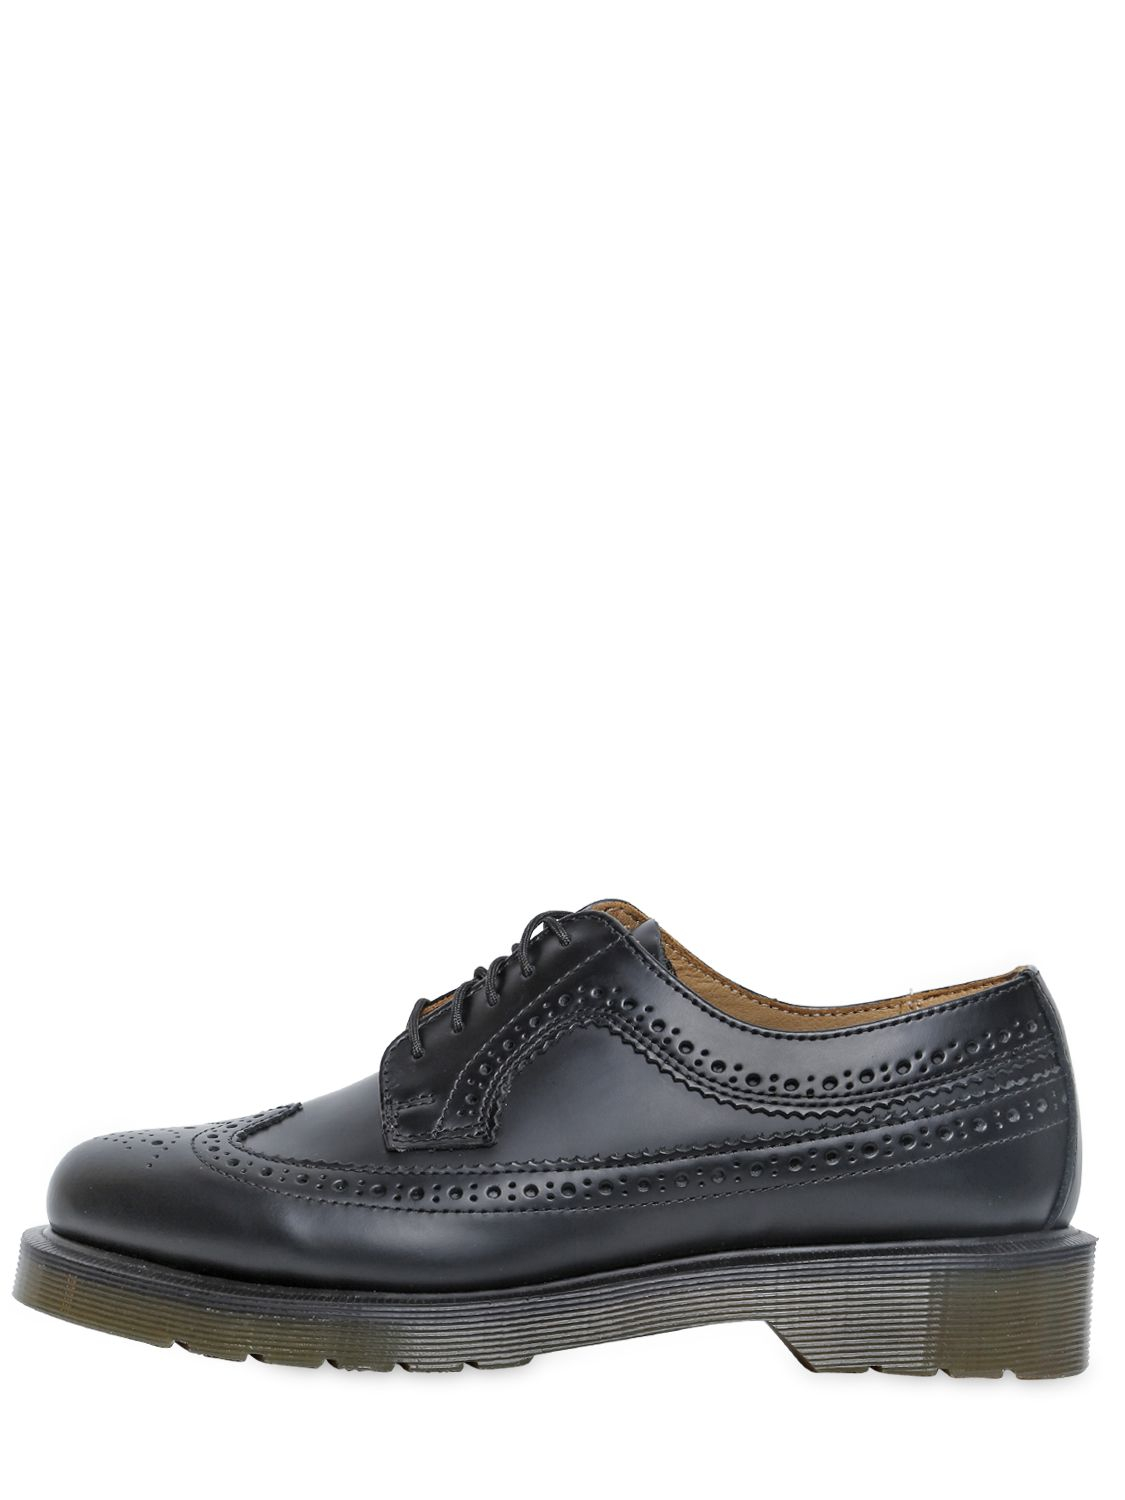 Lyst - Dr. Martens 3989 Brogue Leather Derby Lace-up Shoes in Black